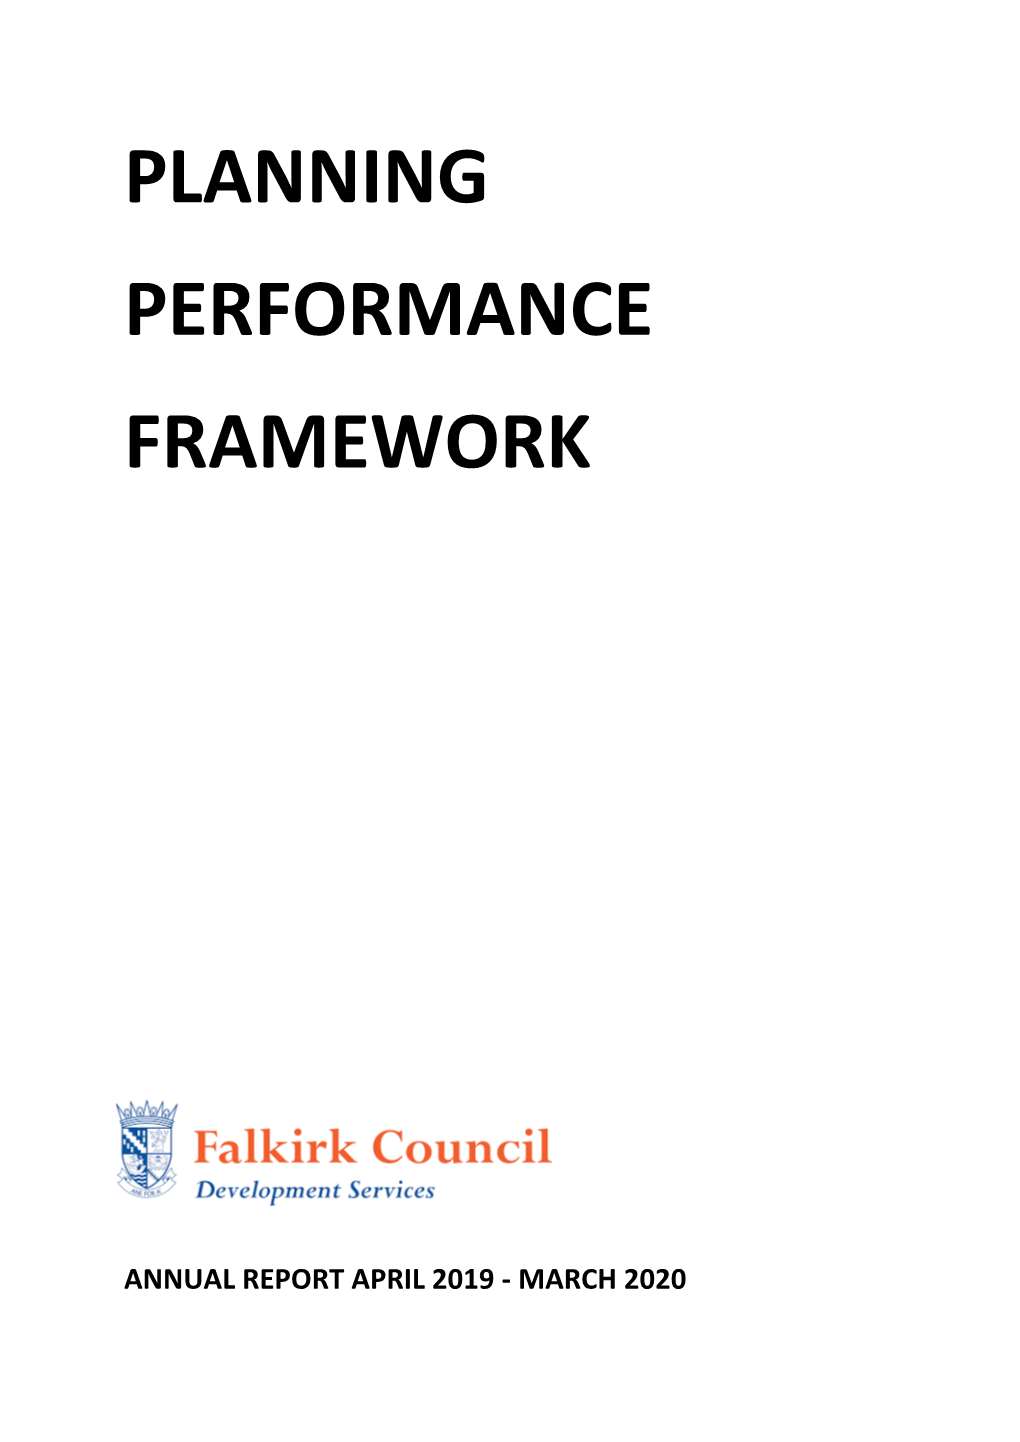 Falkirk Council Is Pleased to Submit Its Ninth Annual Planning Performance Framework (PPF) to Scottish Government